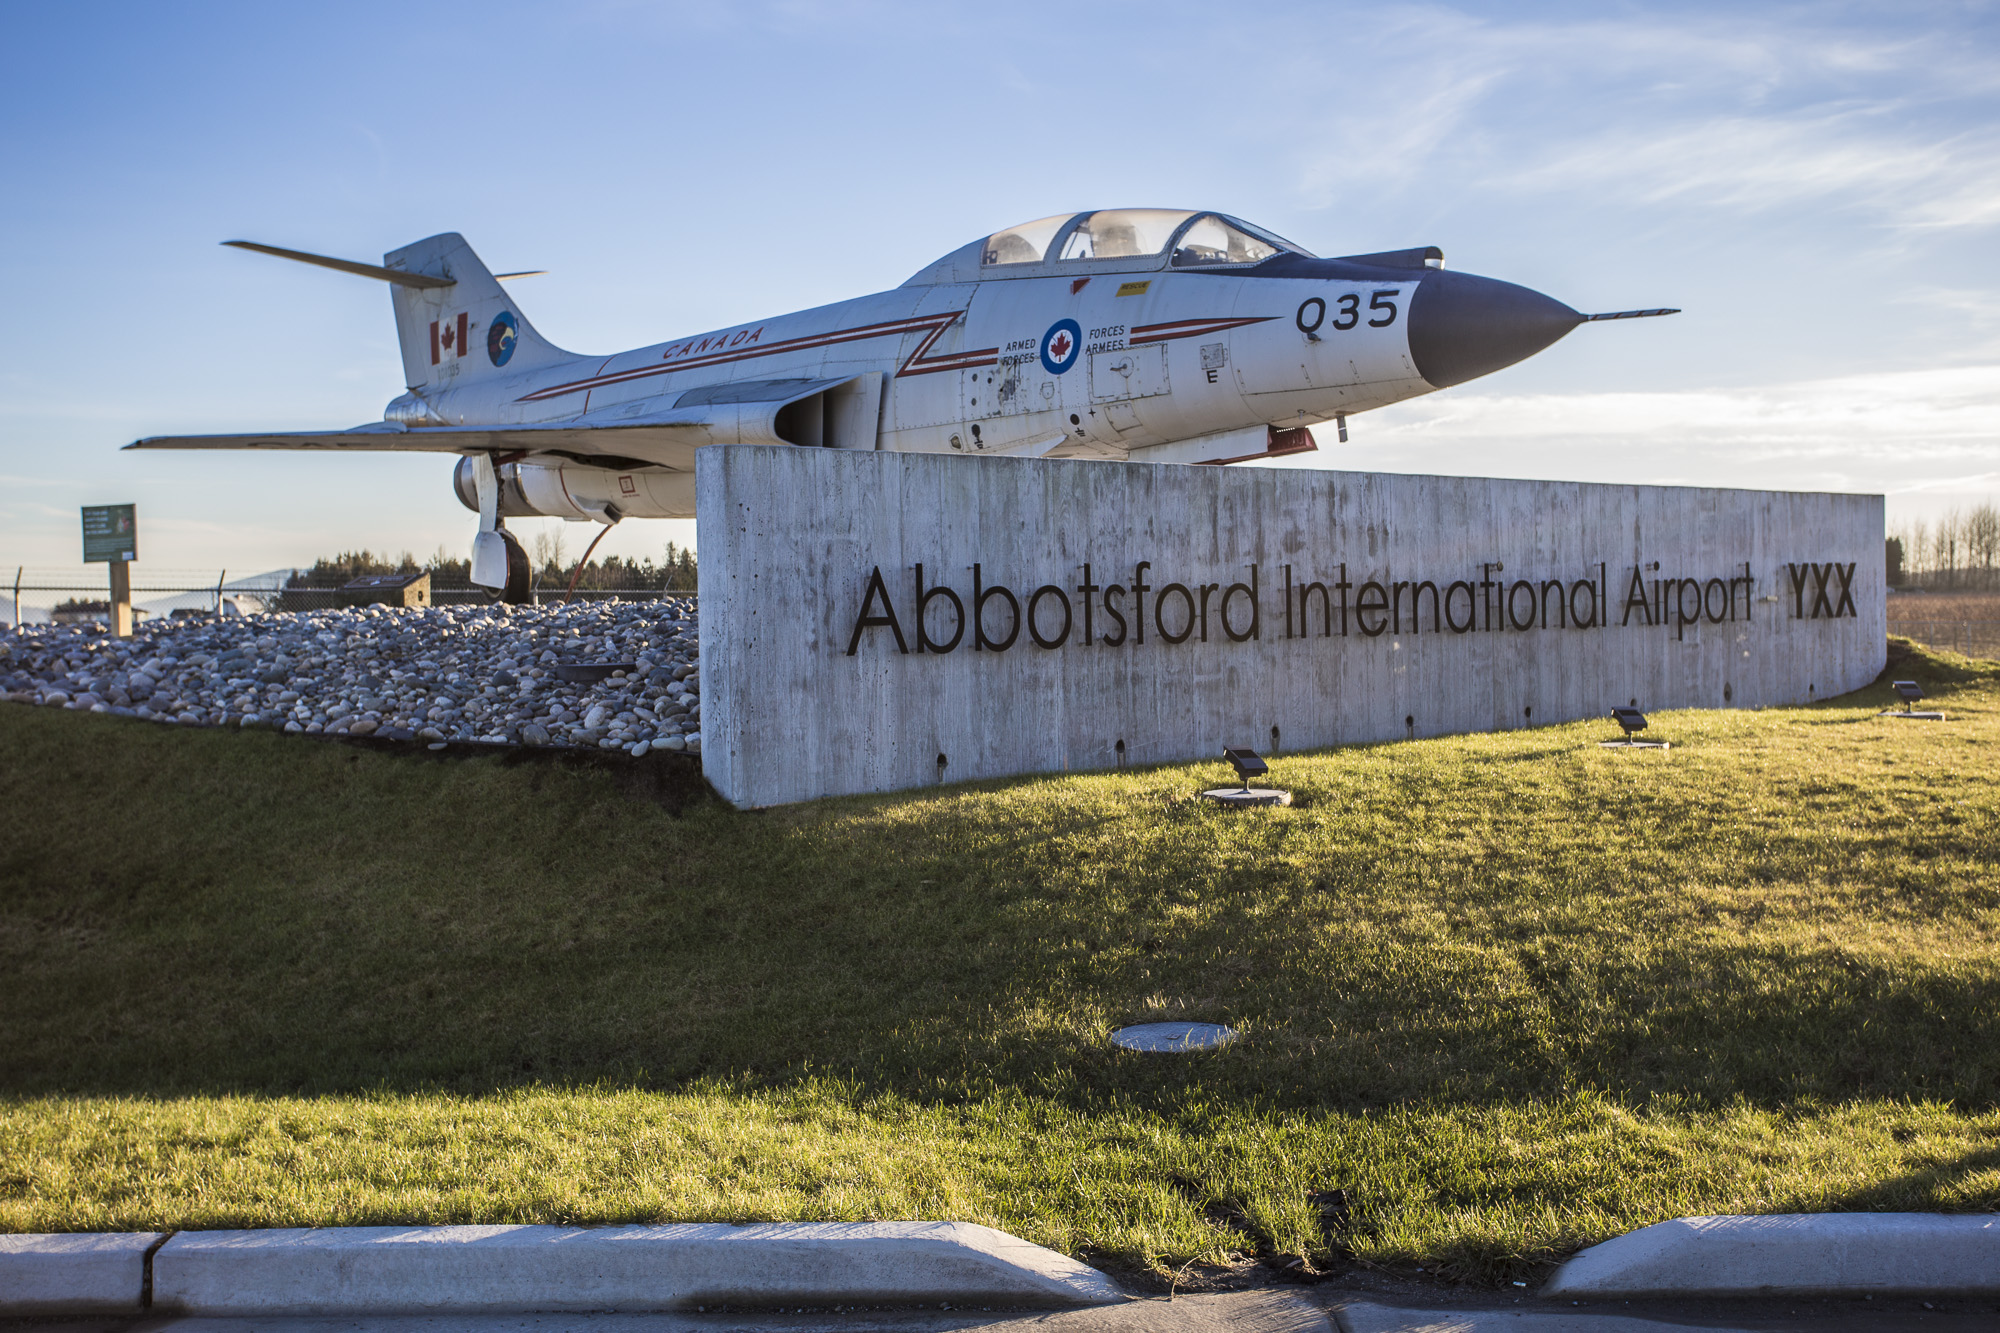 Abbotsford International Airport Sign with Armed Forces Plane